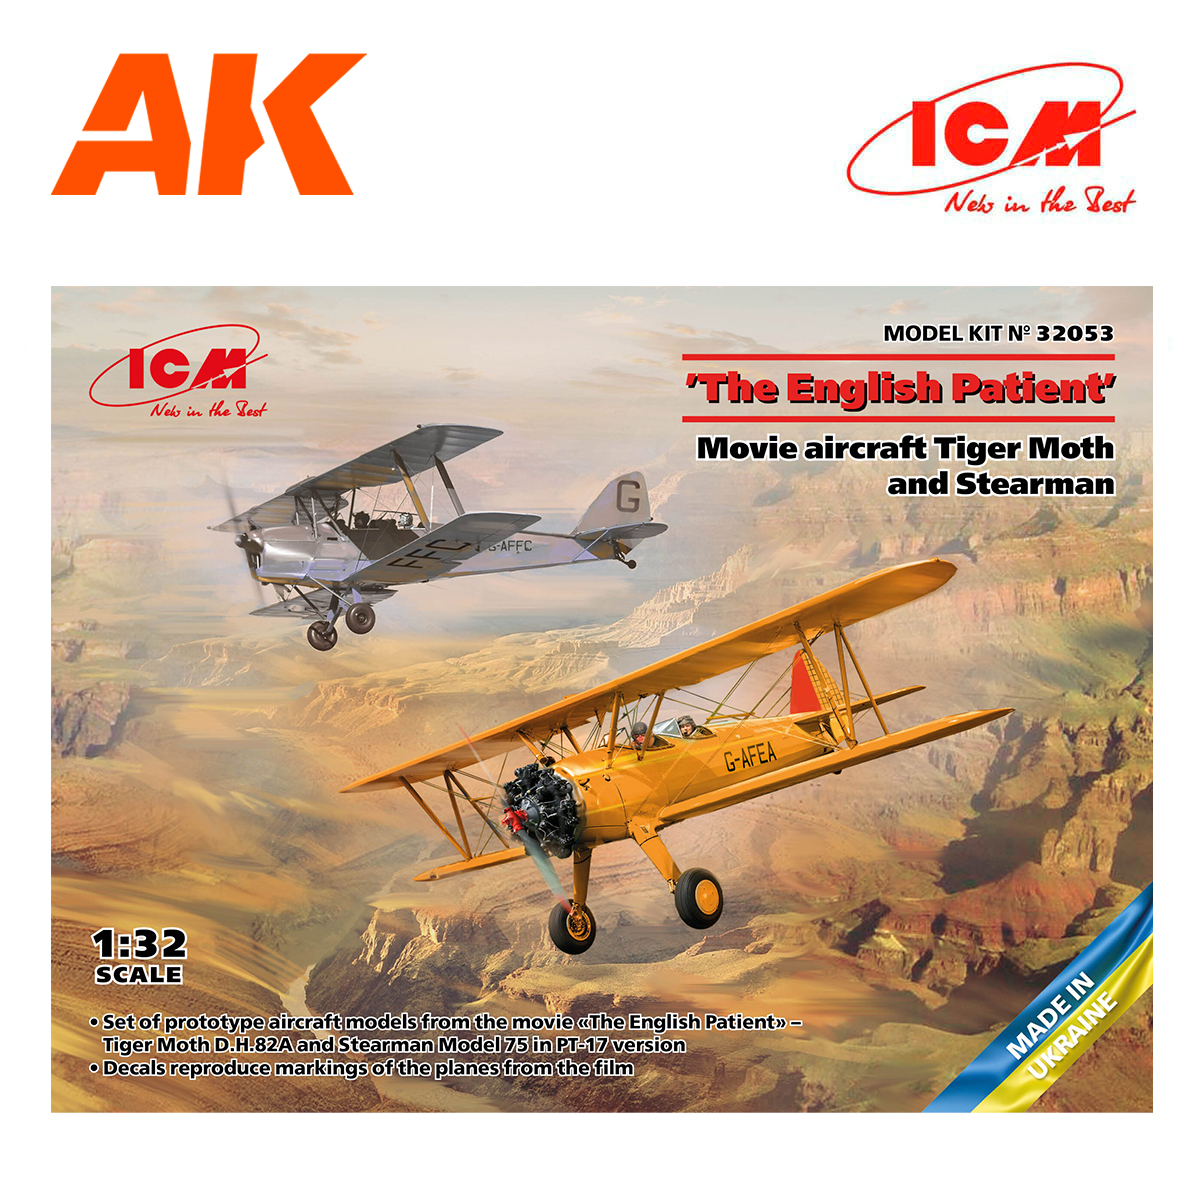 ‘The English Patient’. Movie aircraft Tiger Moth and Stearman 1/32